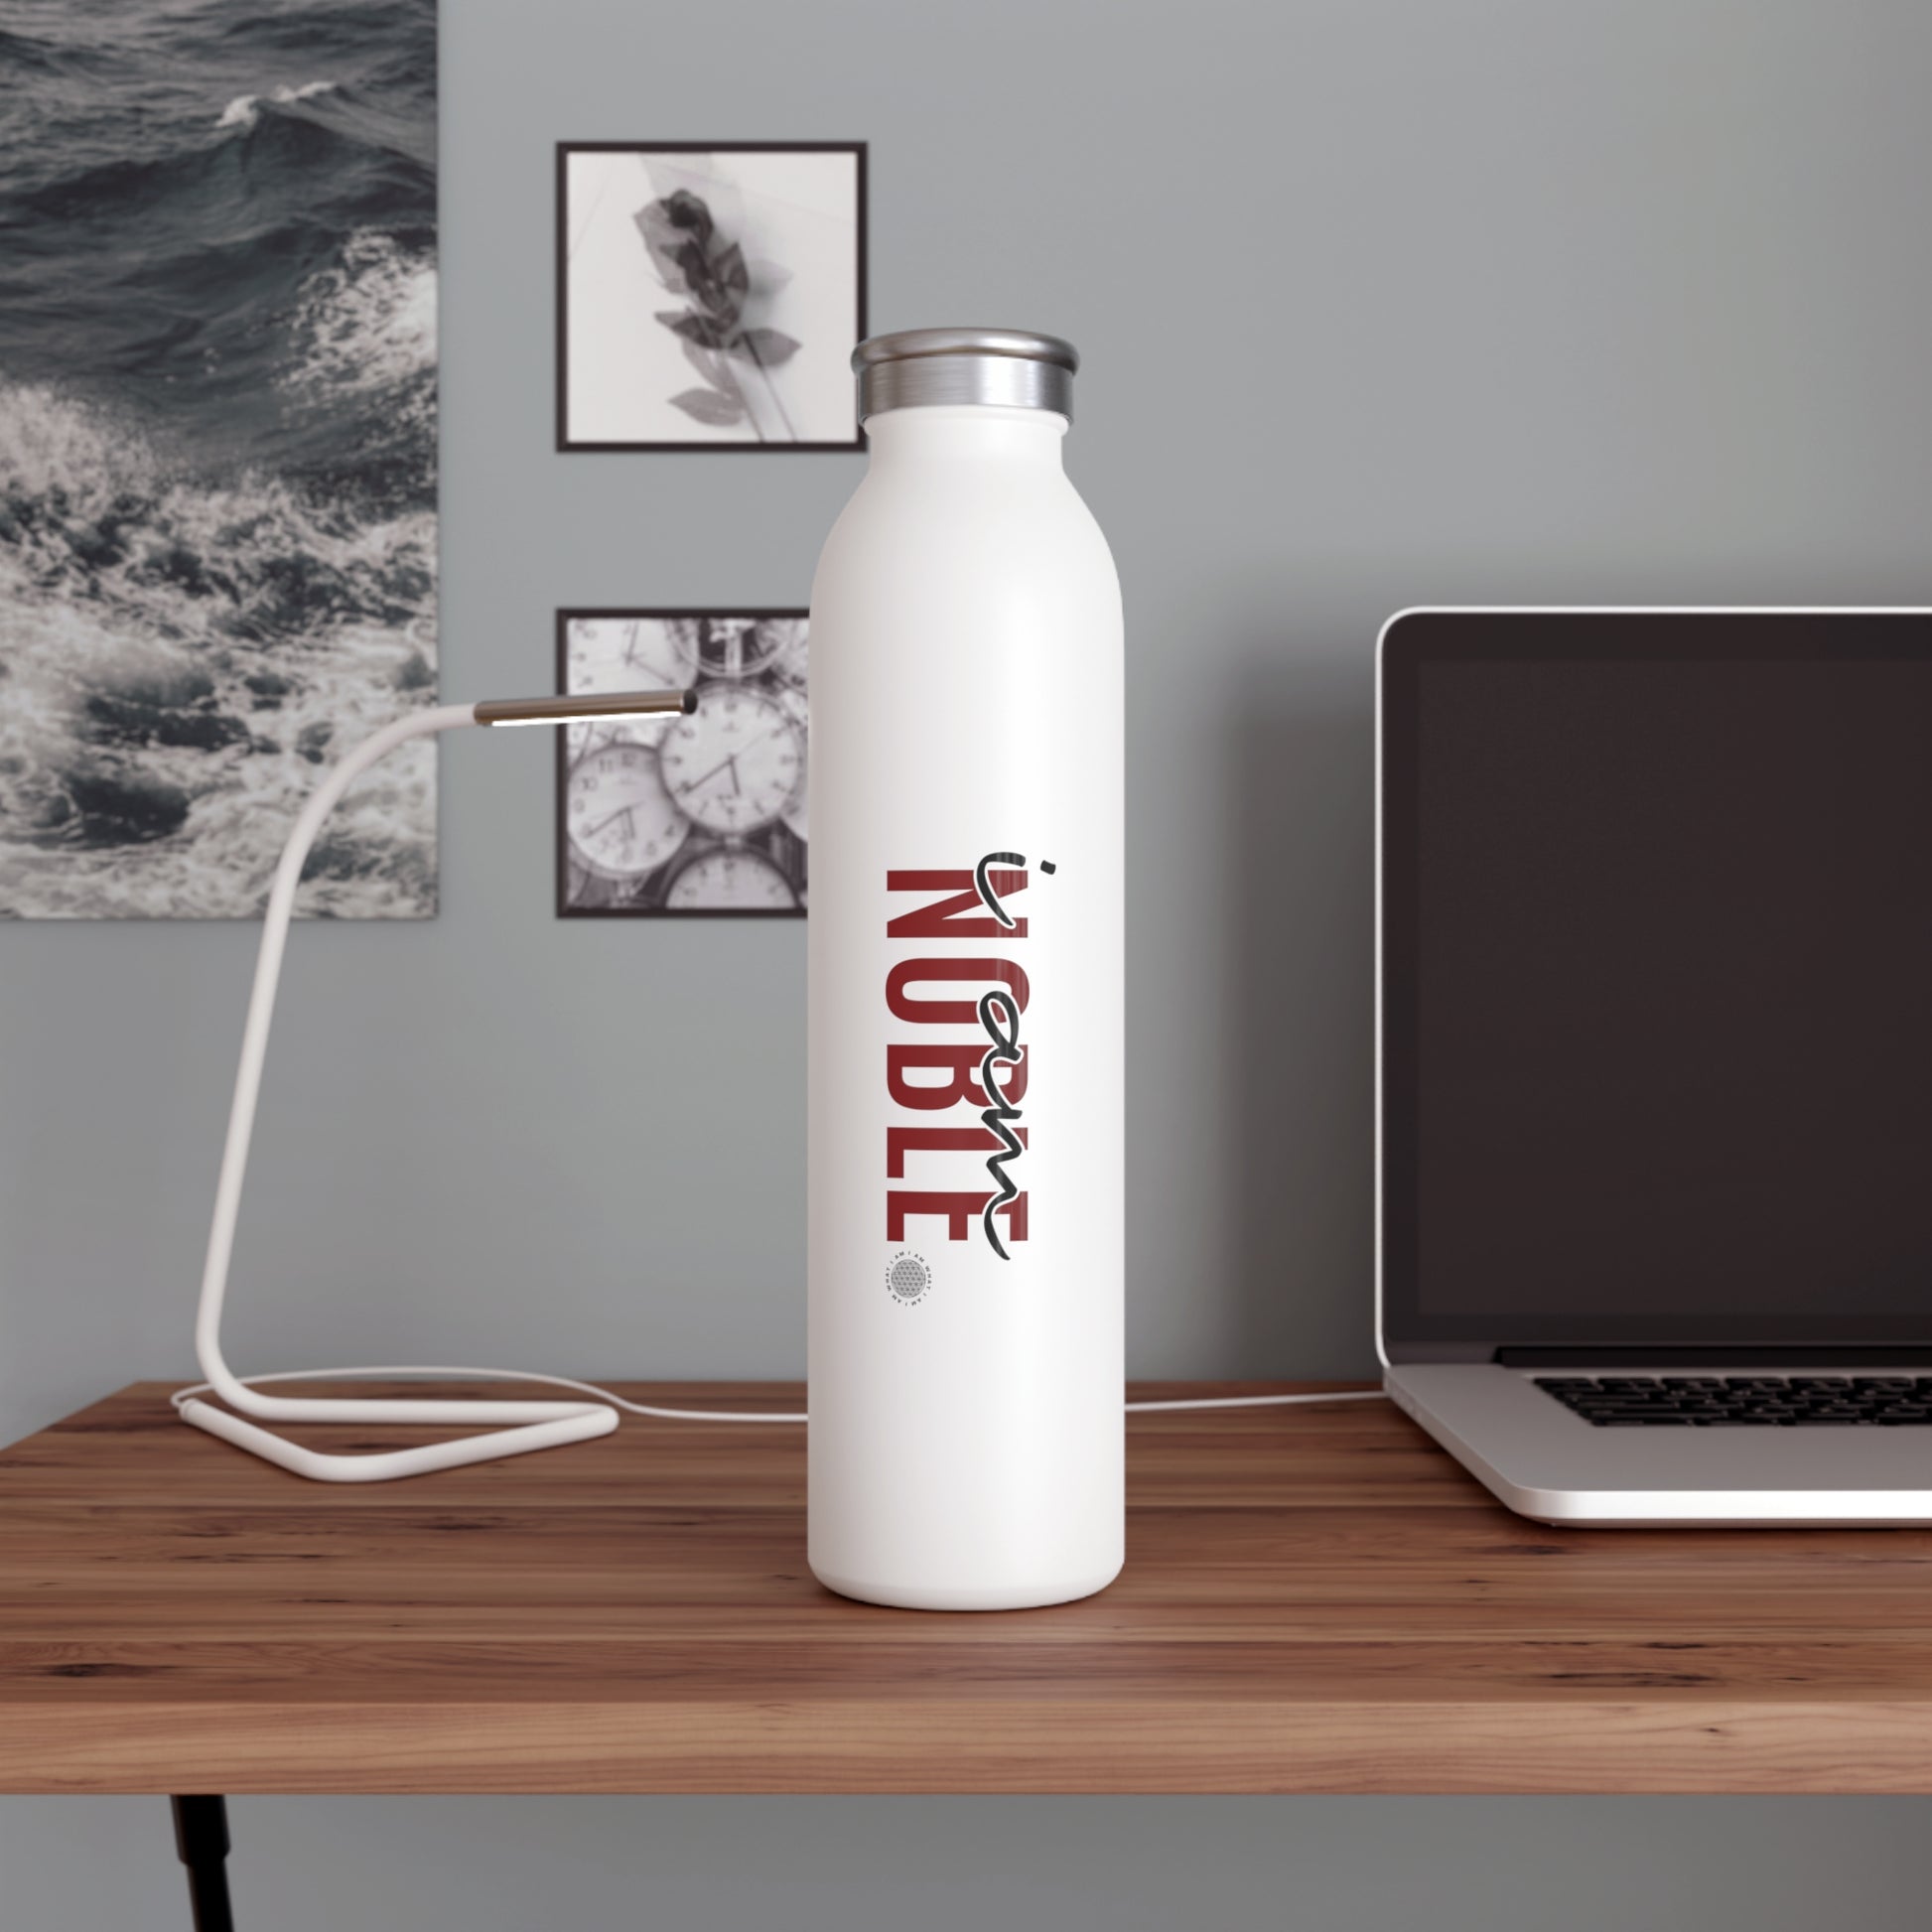 Our I Am Noble affirmation water bottle is one of our positive affirmations for mental health. Positive thinking keeps our mindset happy and healthy. This personalized water bottle was designed to become a creator’s favorite canvas of expression.